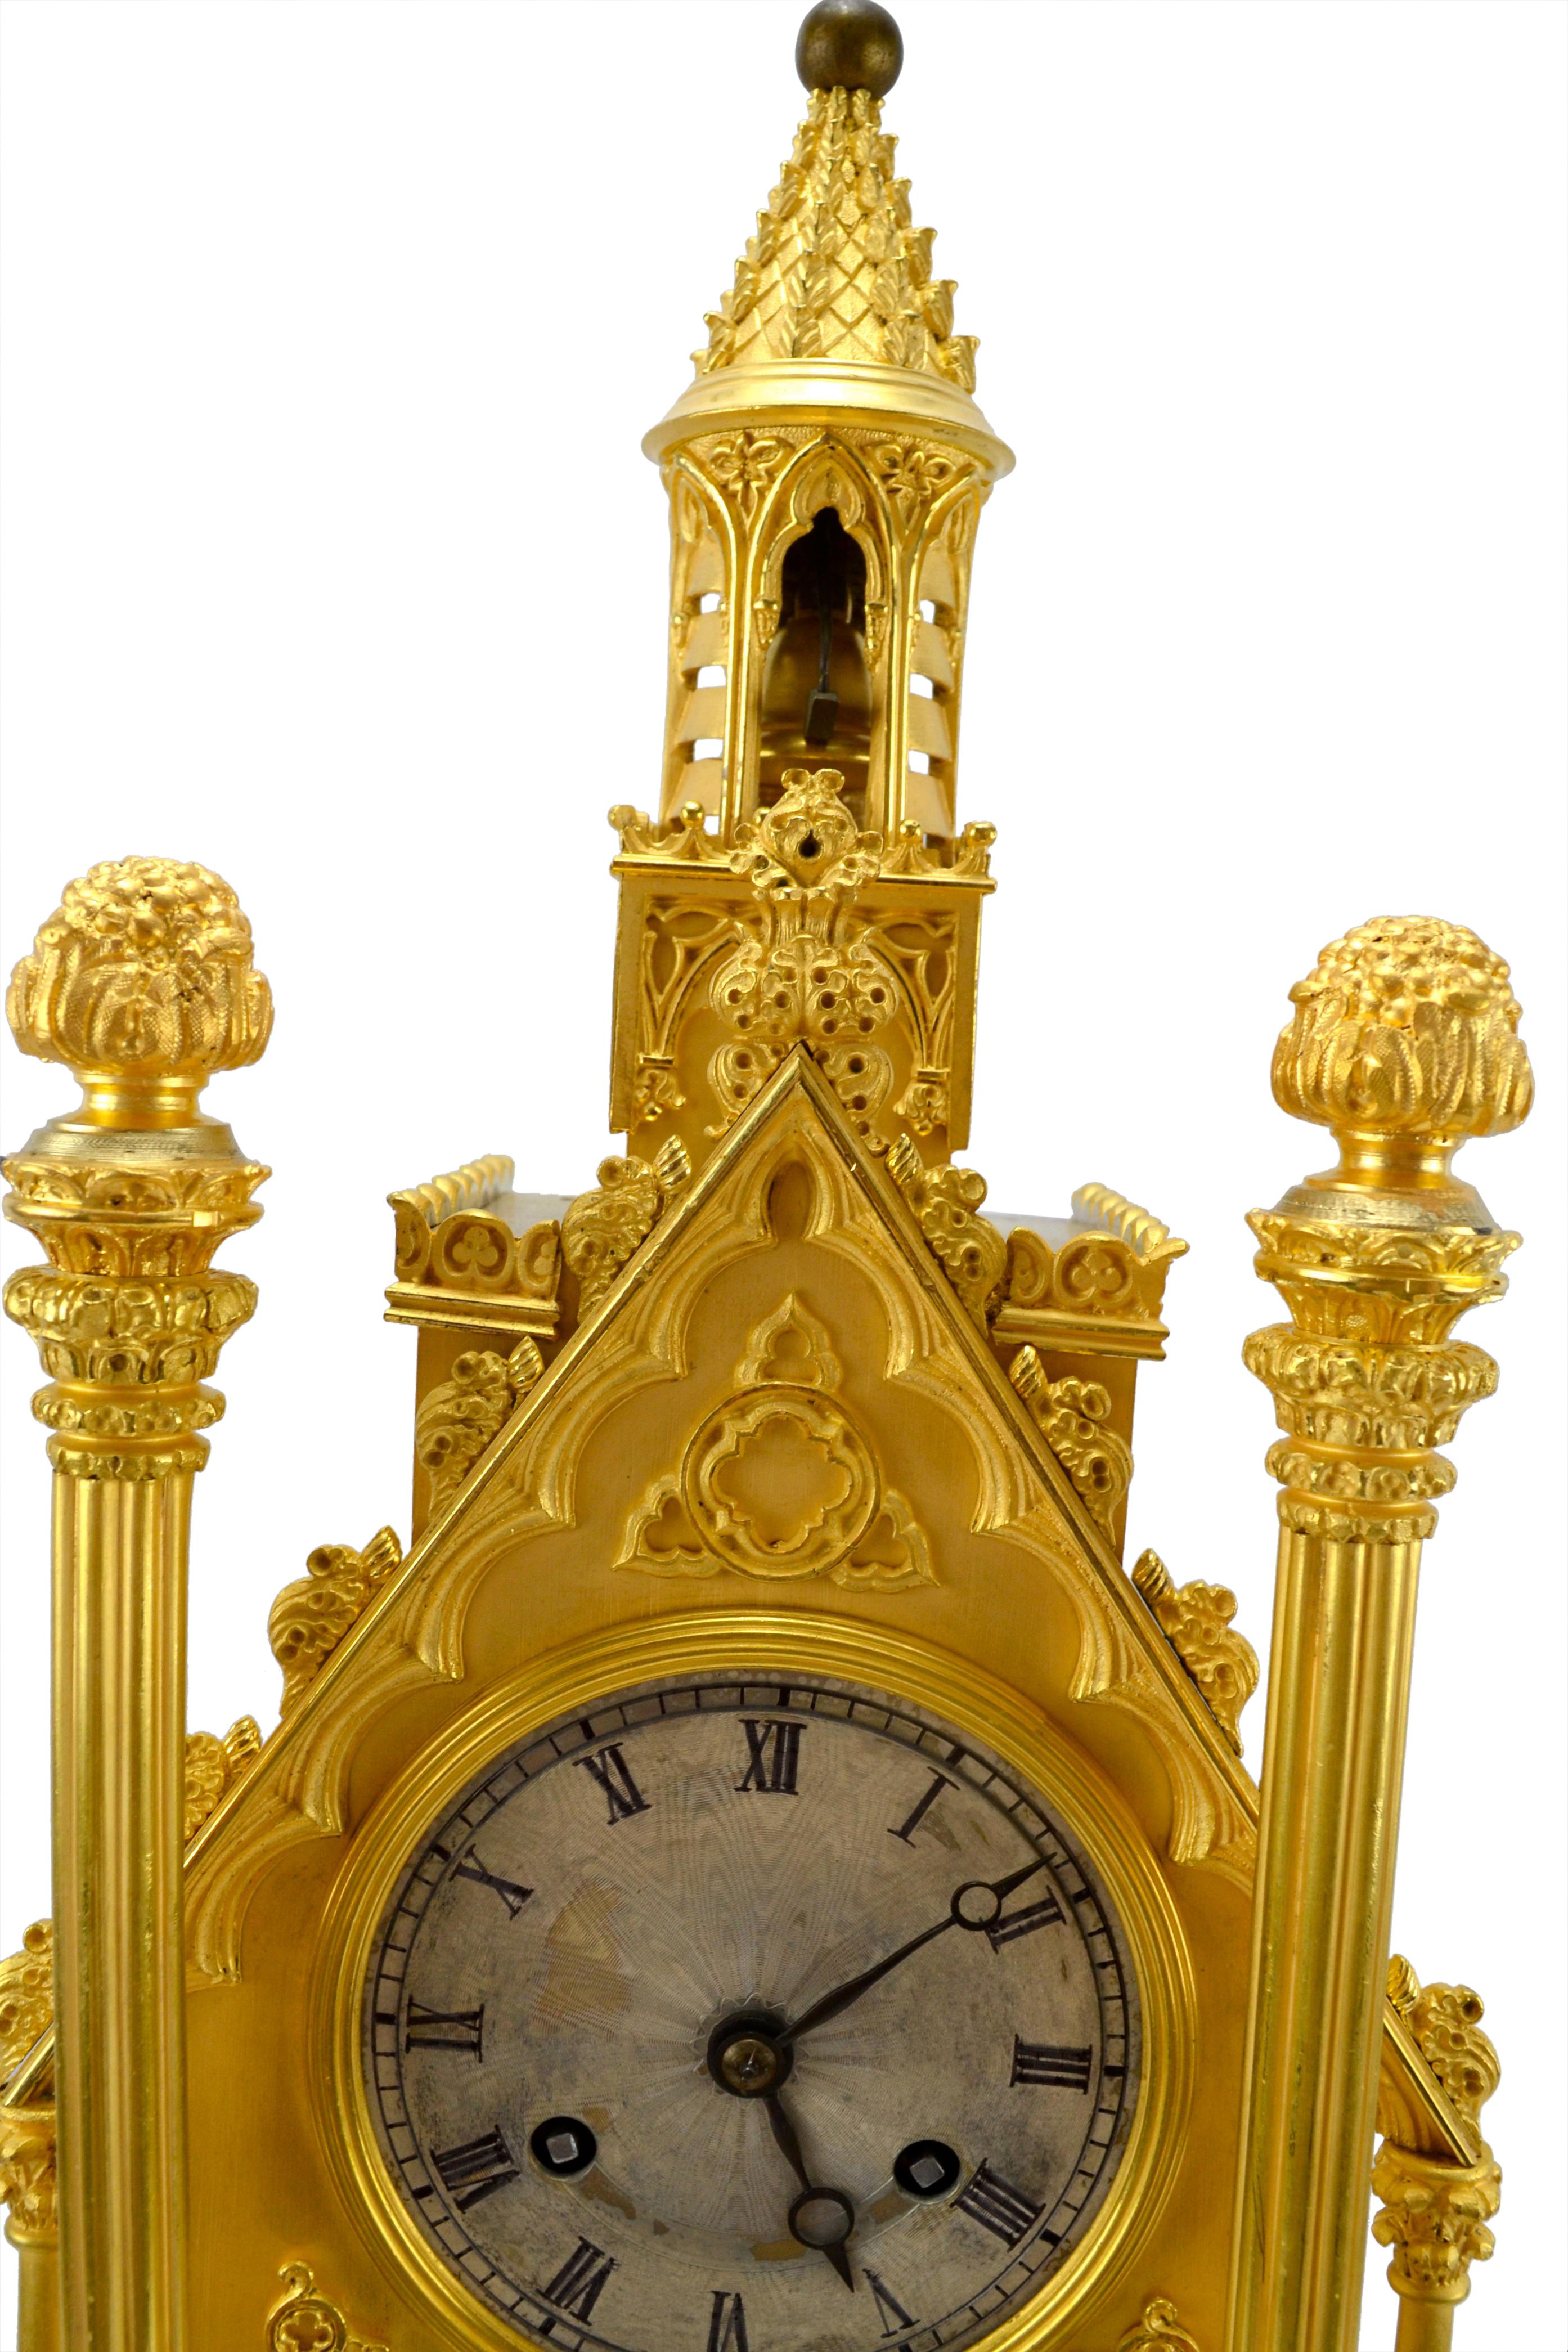 A mid 19 century French  Gilt Bronze Gothic style mantel clock and garniture which the French call 